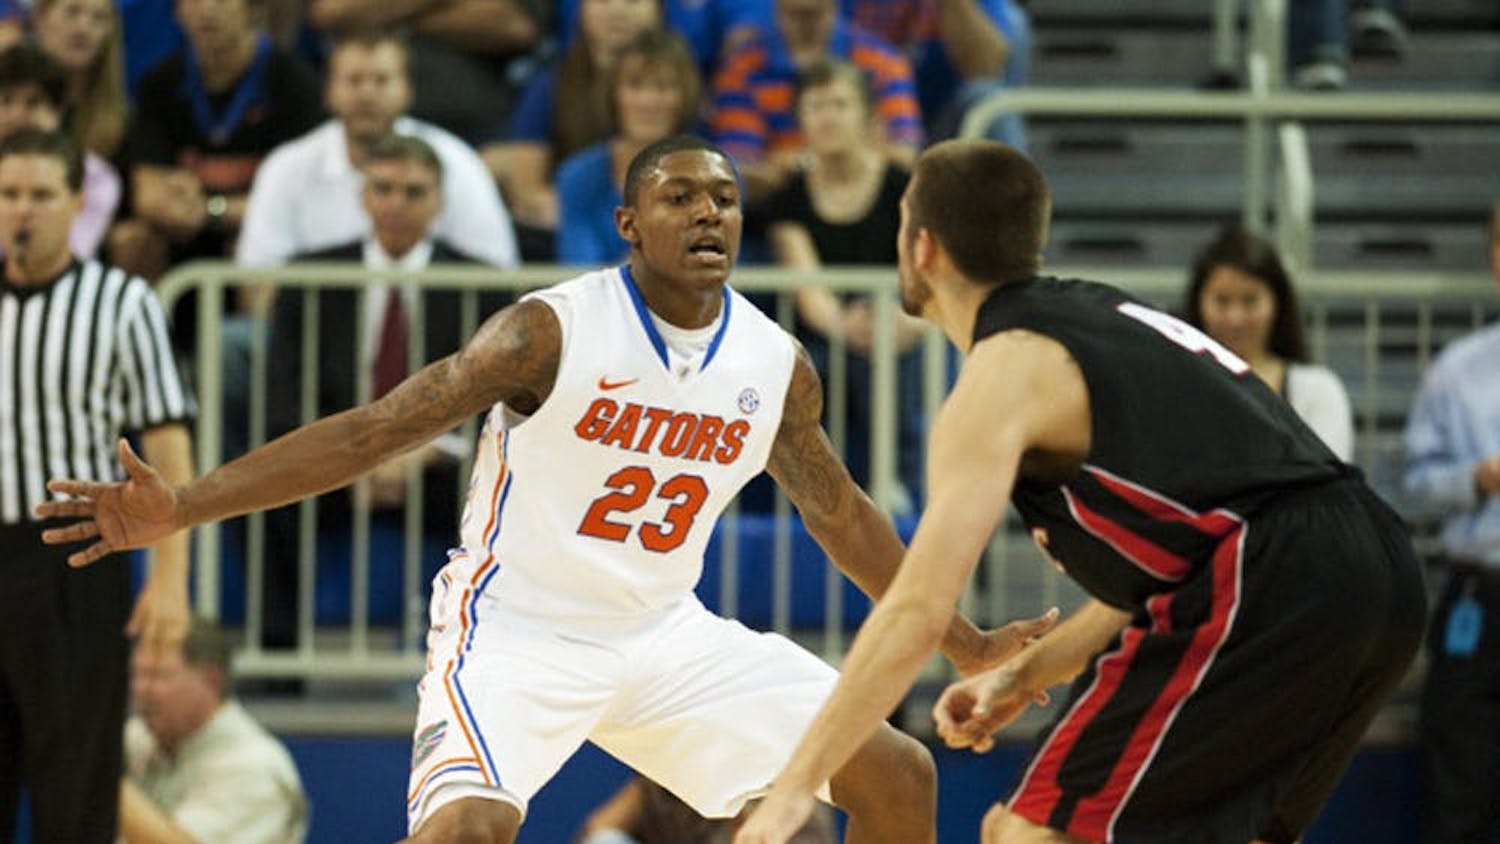 Former Gator Bradley Beal was named to the US Olympic Team Wednesday.